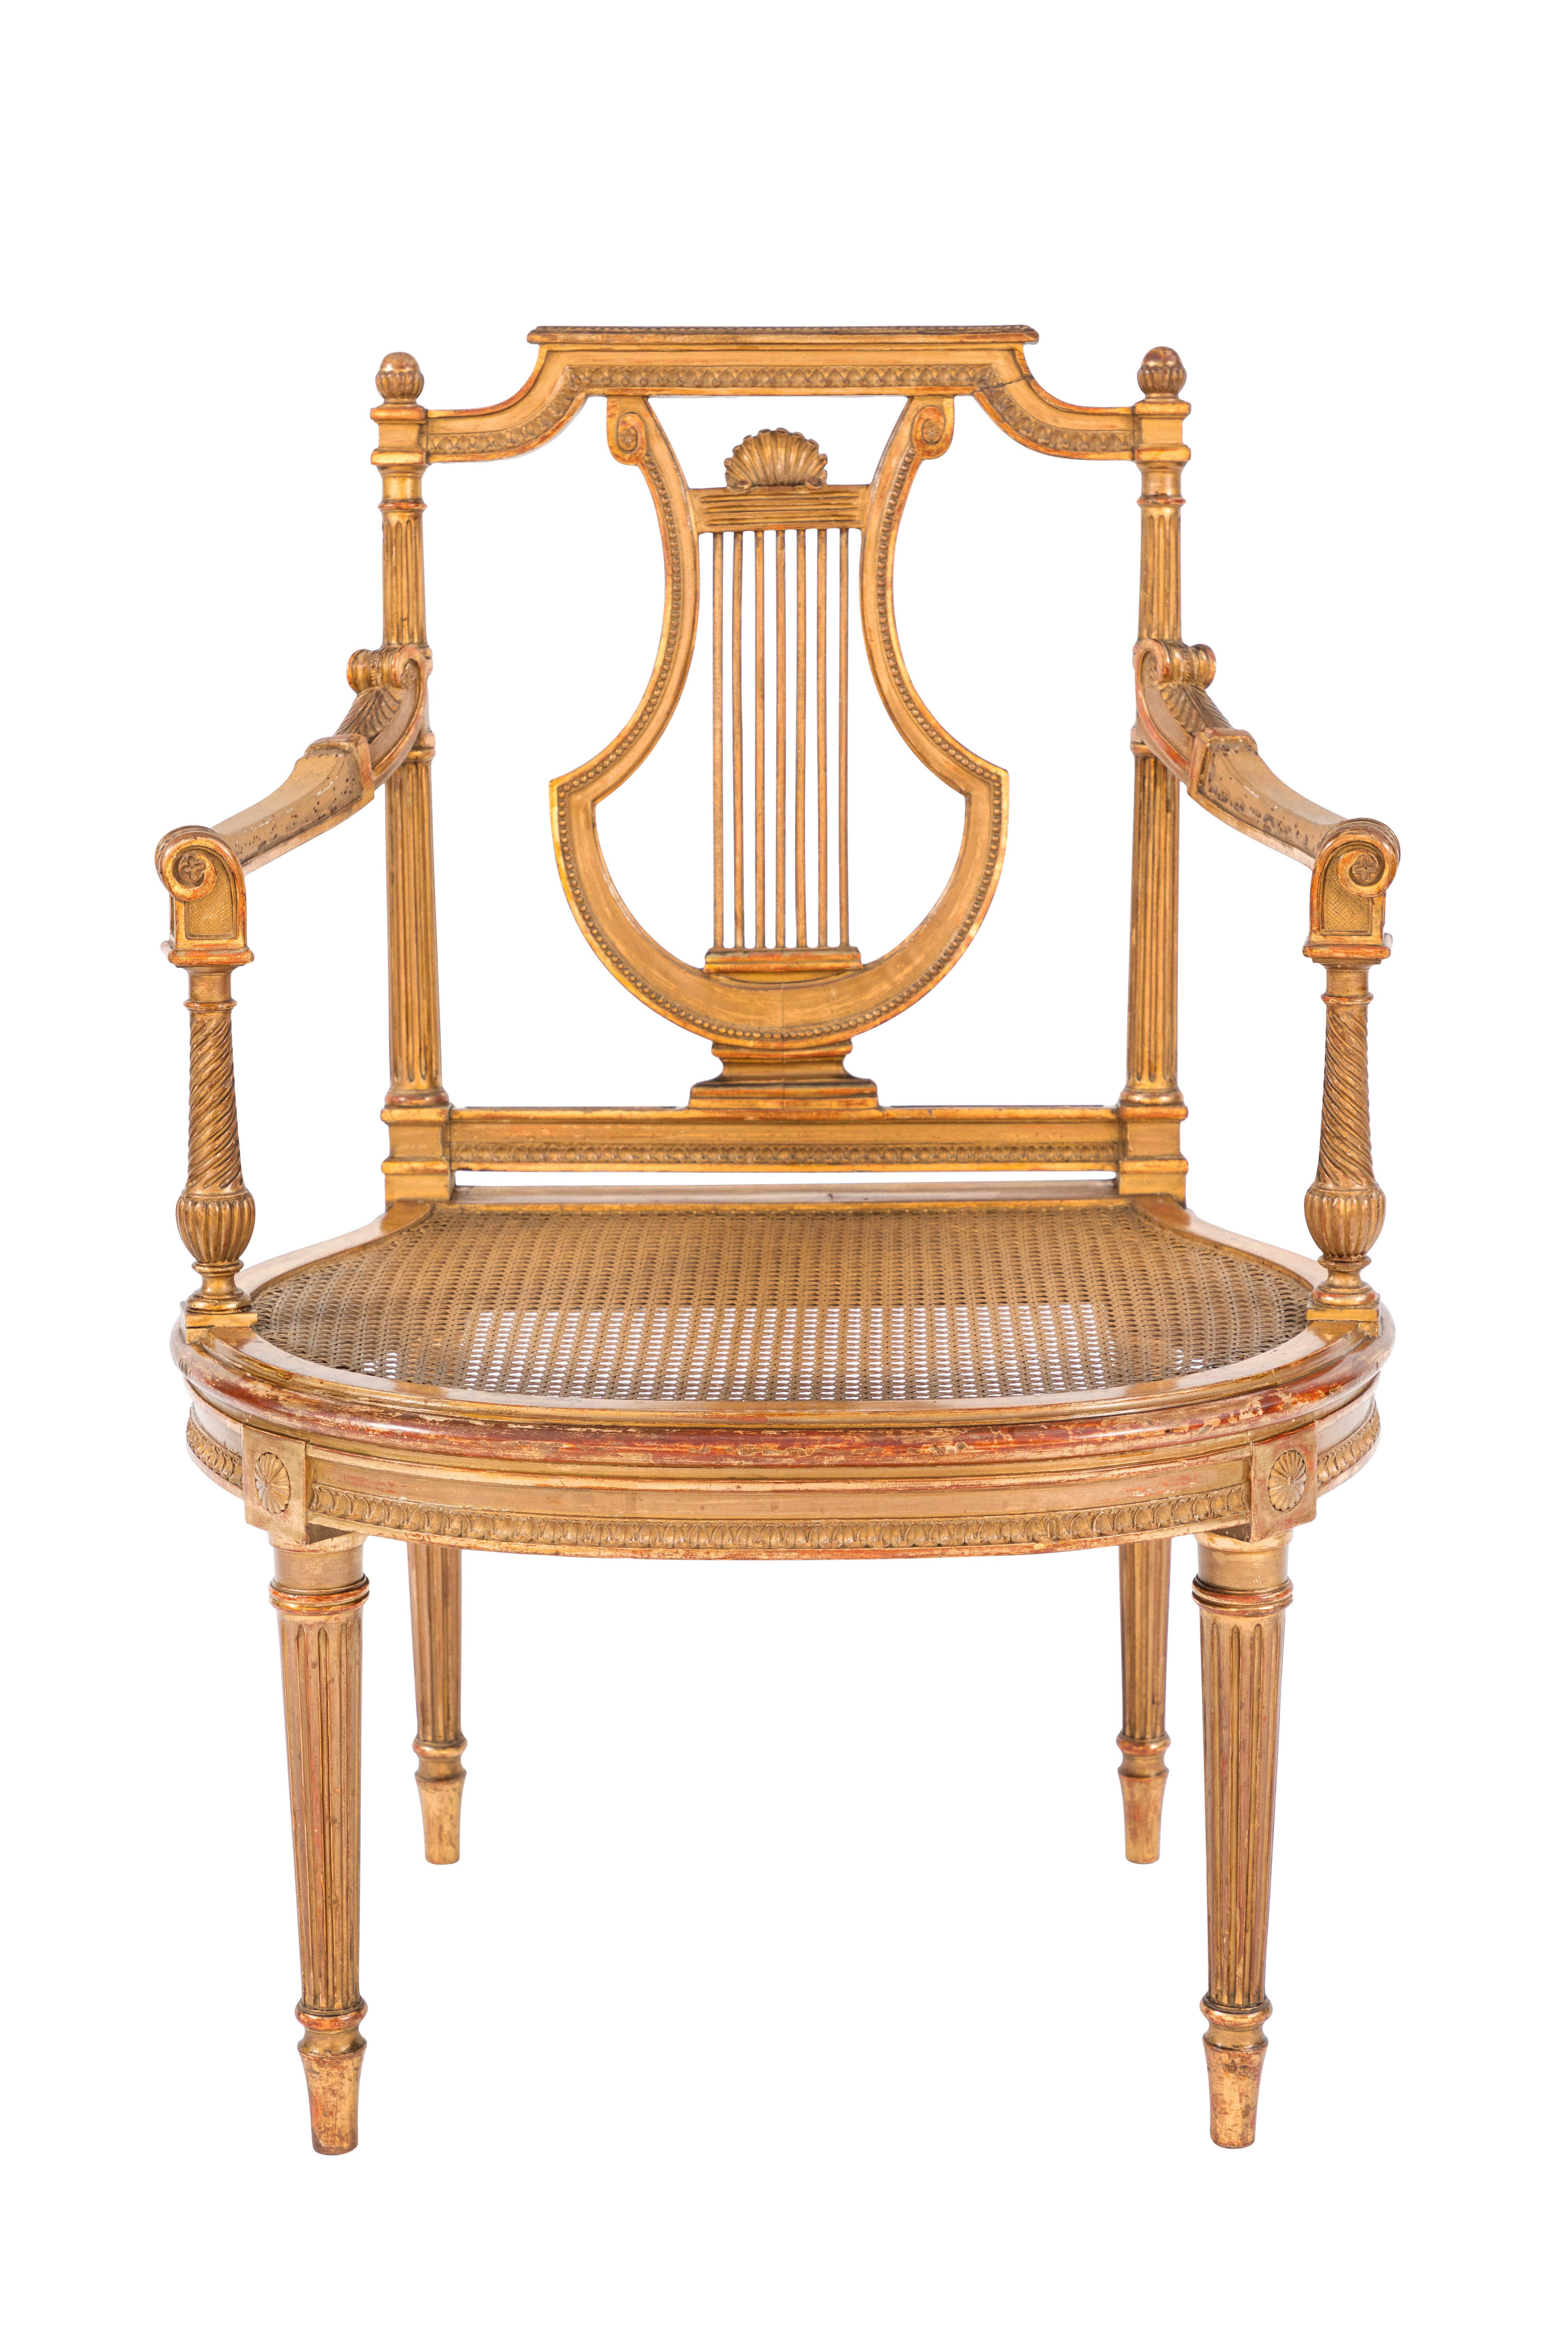 19th Century French Giltwood Single Open Arm Chair For Sale 3